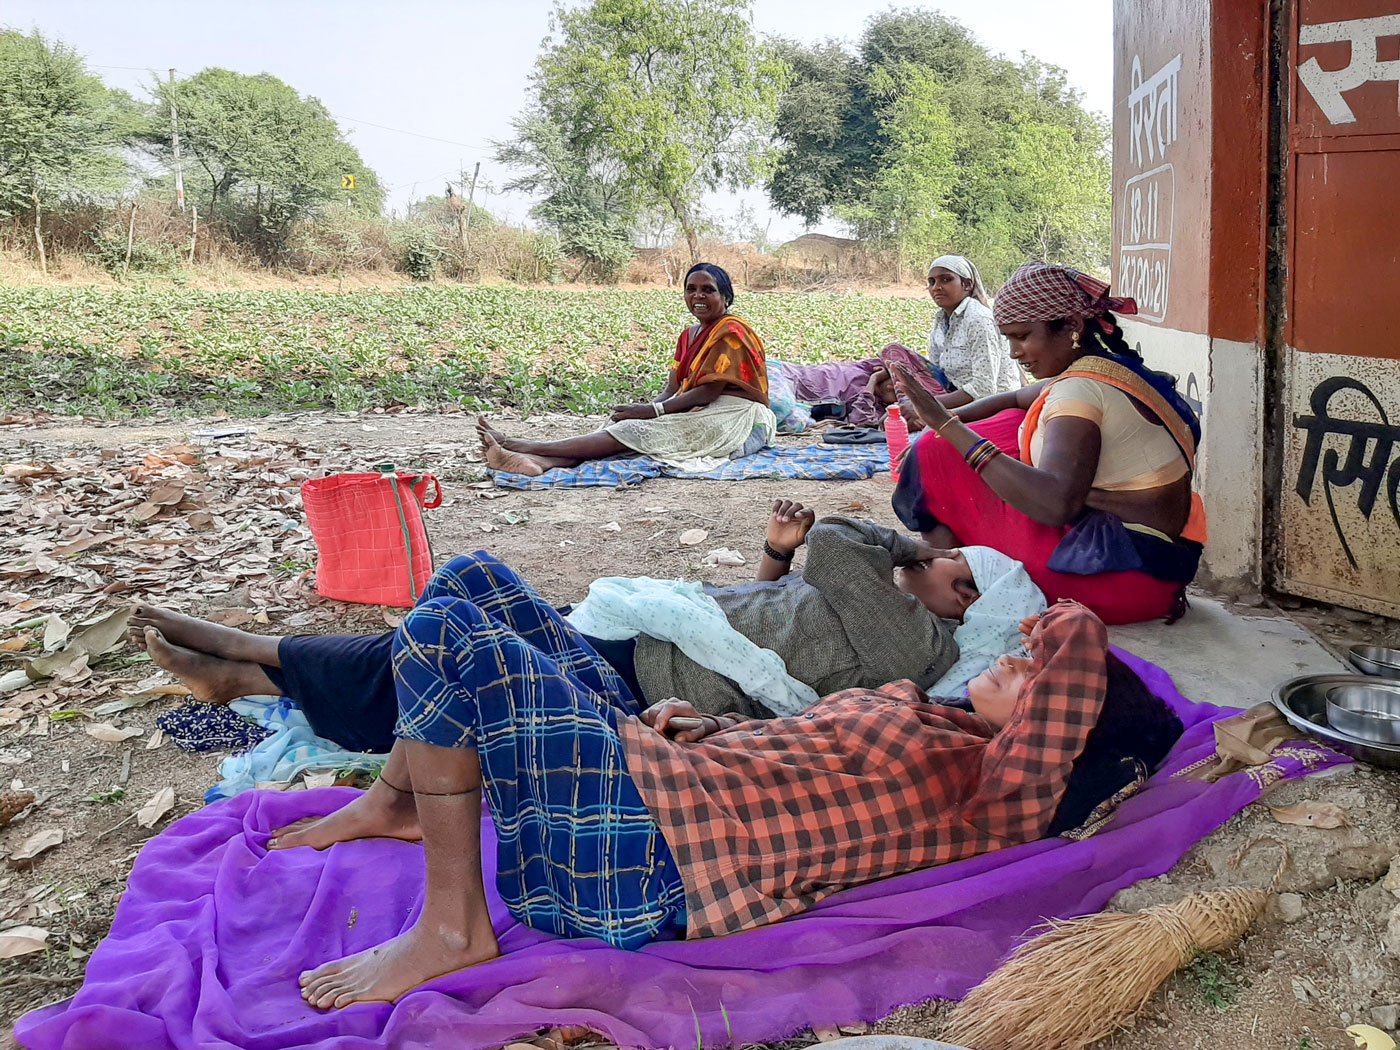 A group of women agricultural labourers resting after working in a paddy field in Raka, a village in Rajnandgaon district of Chhattisgarh